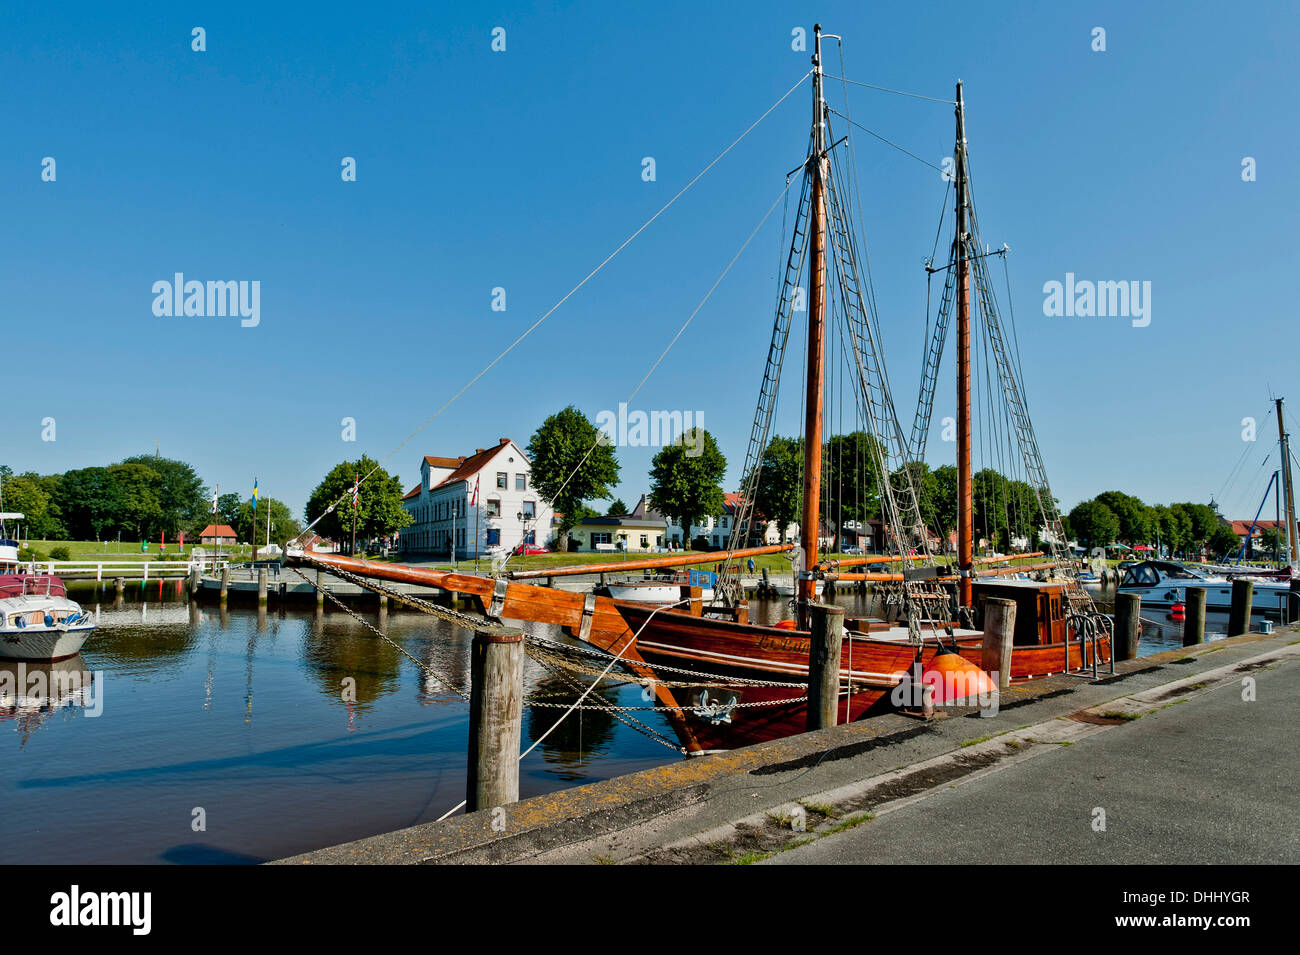 Old harbour of Toenning, Nordsee, Schleswig-Holstein, Germany Stock Photo